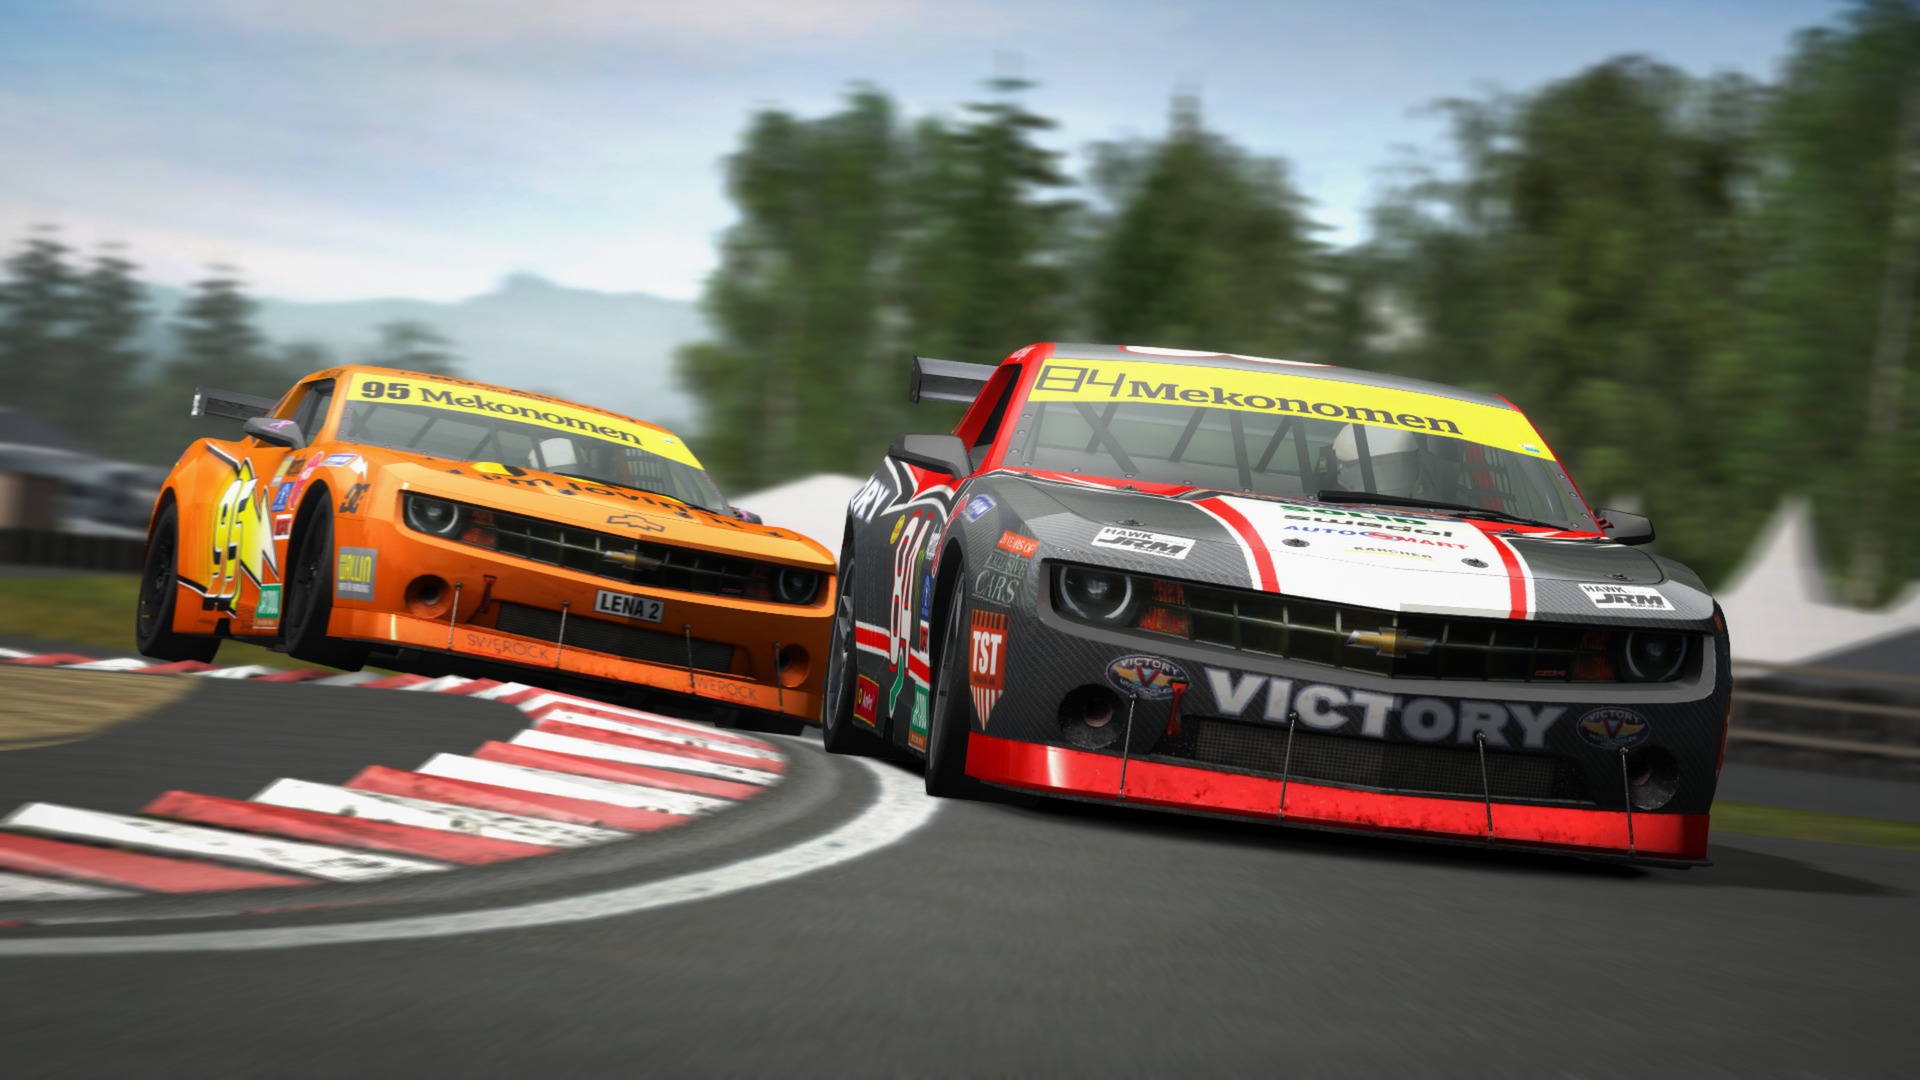 free 3d racing games download for windows 10